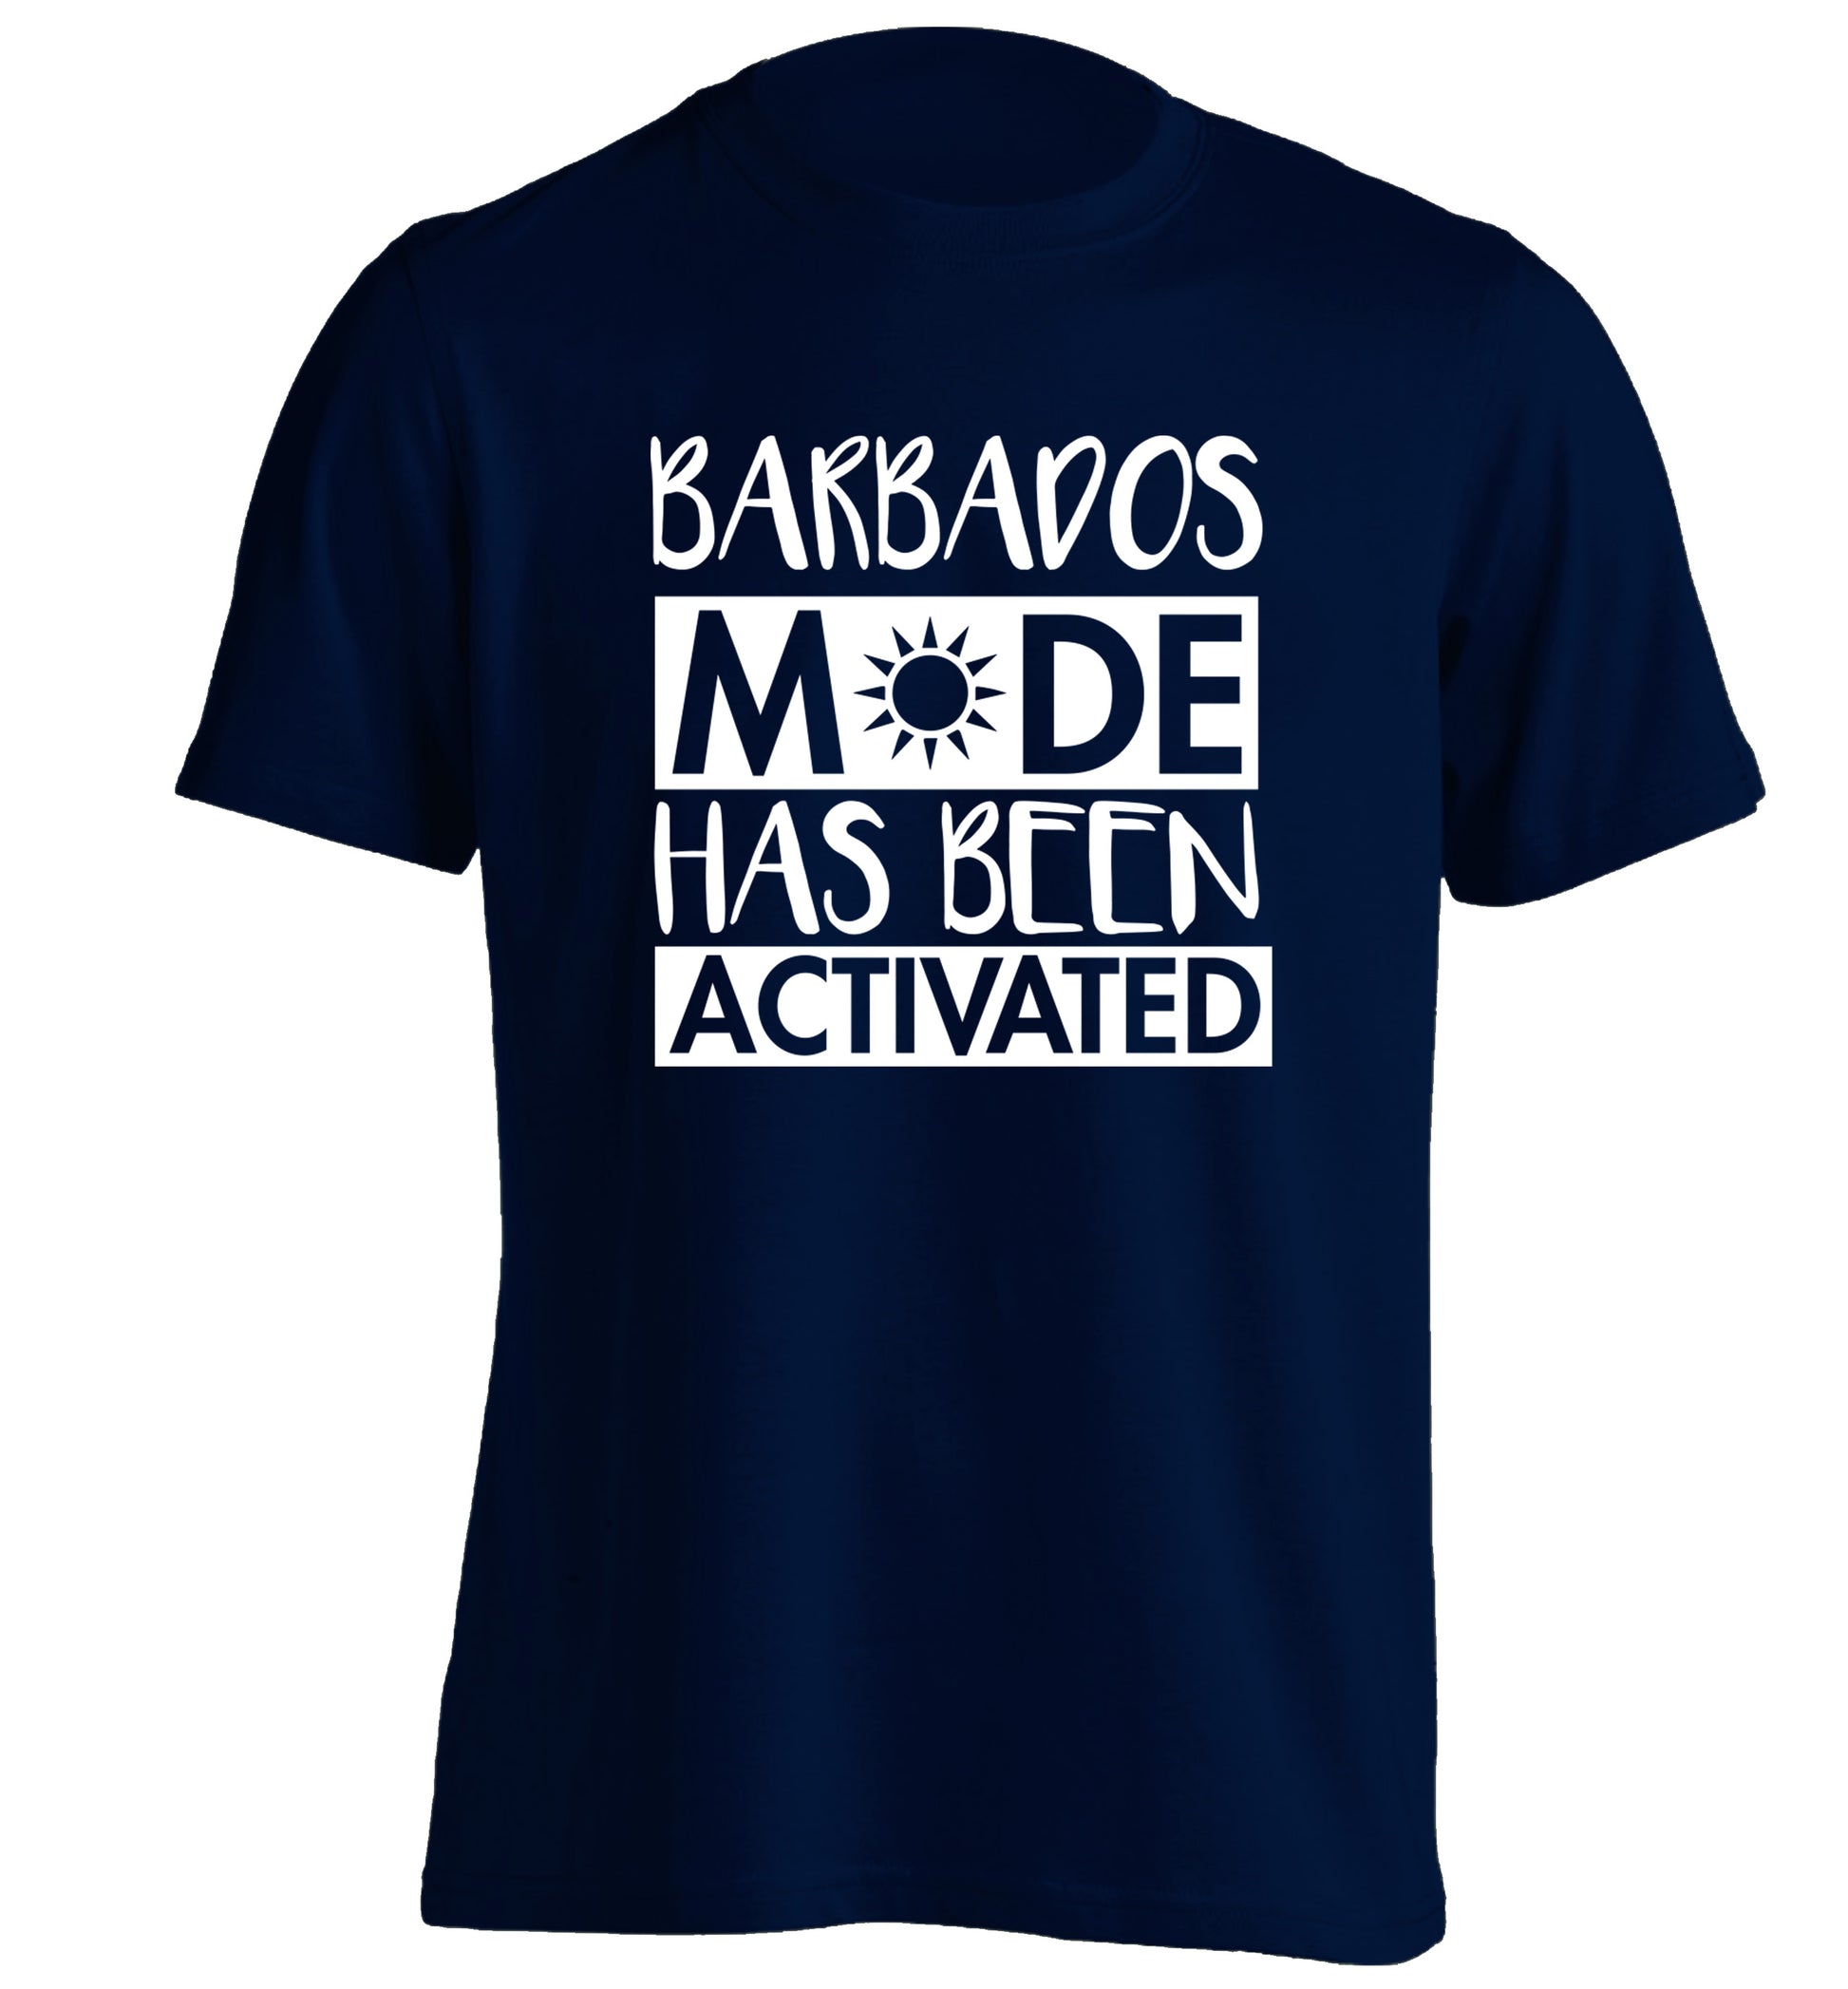 Barbados mode has been activated adults unisex navy Tshirt 2XL